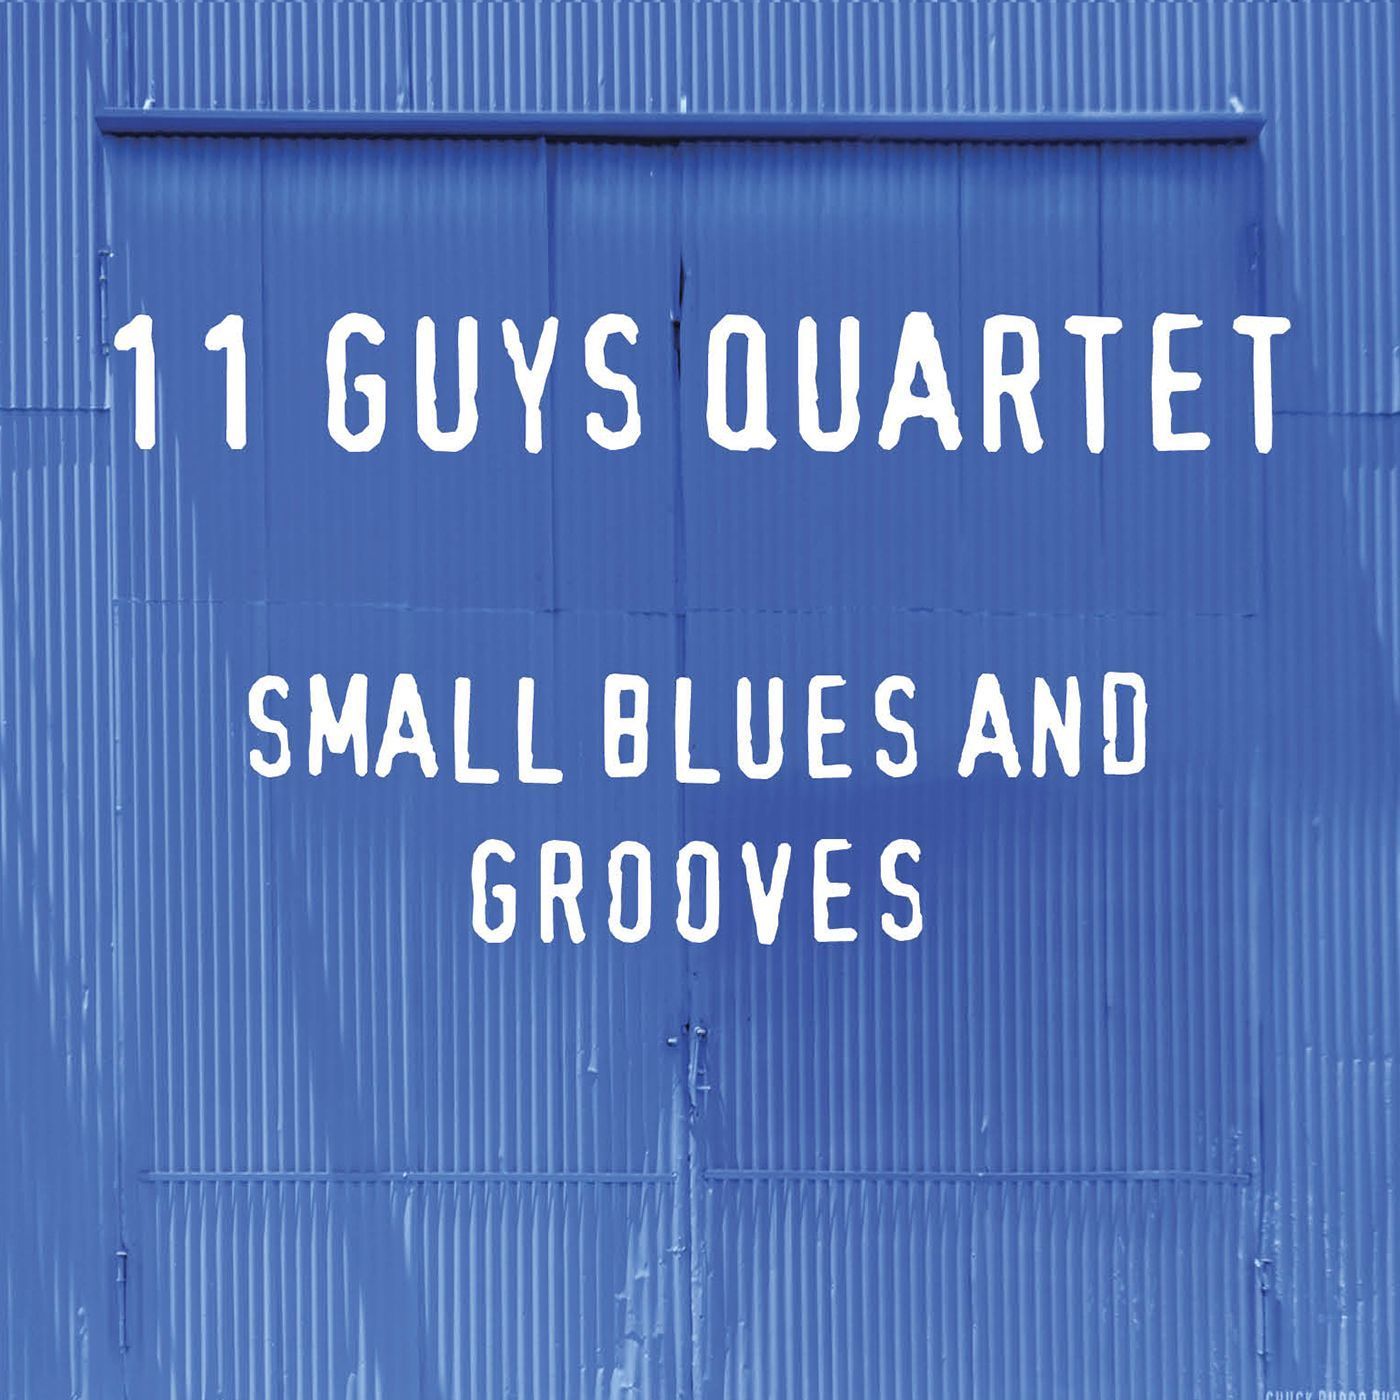 11 Guys Quartet – Small Blues and Grooves (2020) [FLAC 24bit/44,1kHz]